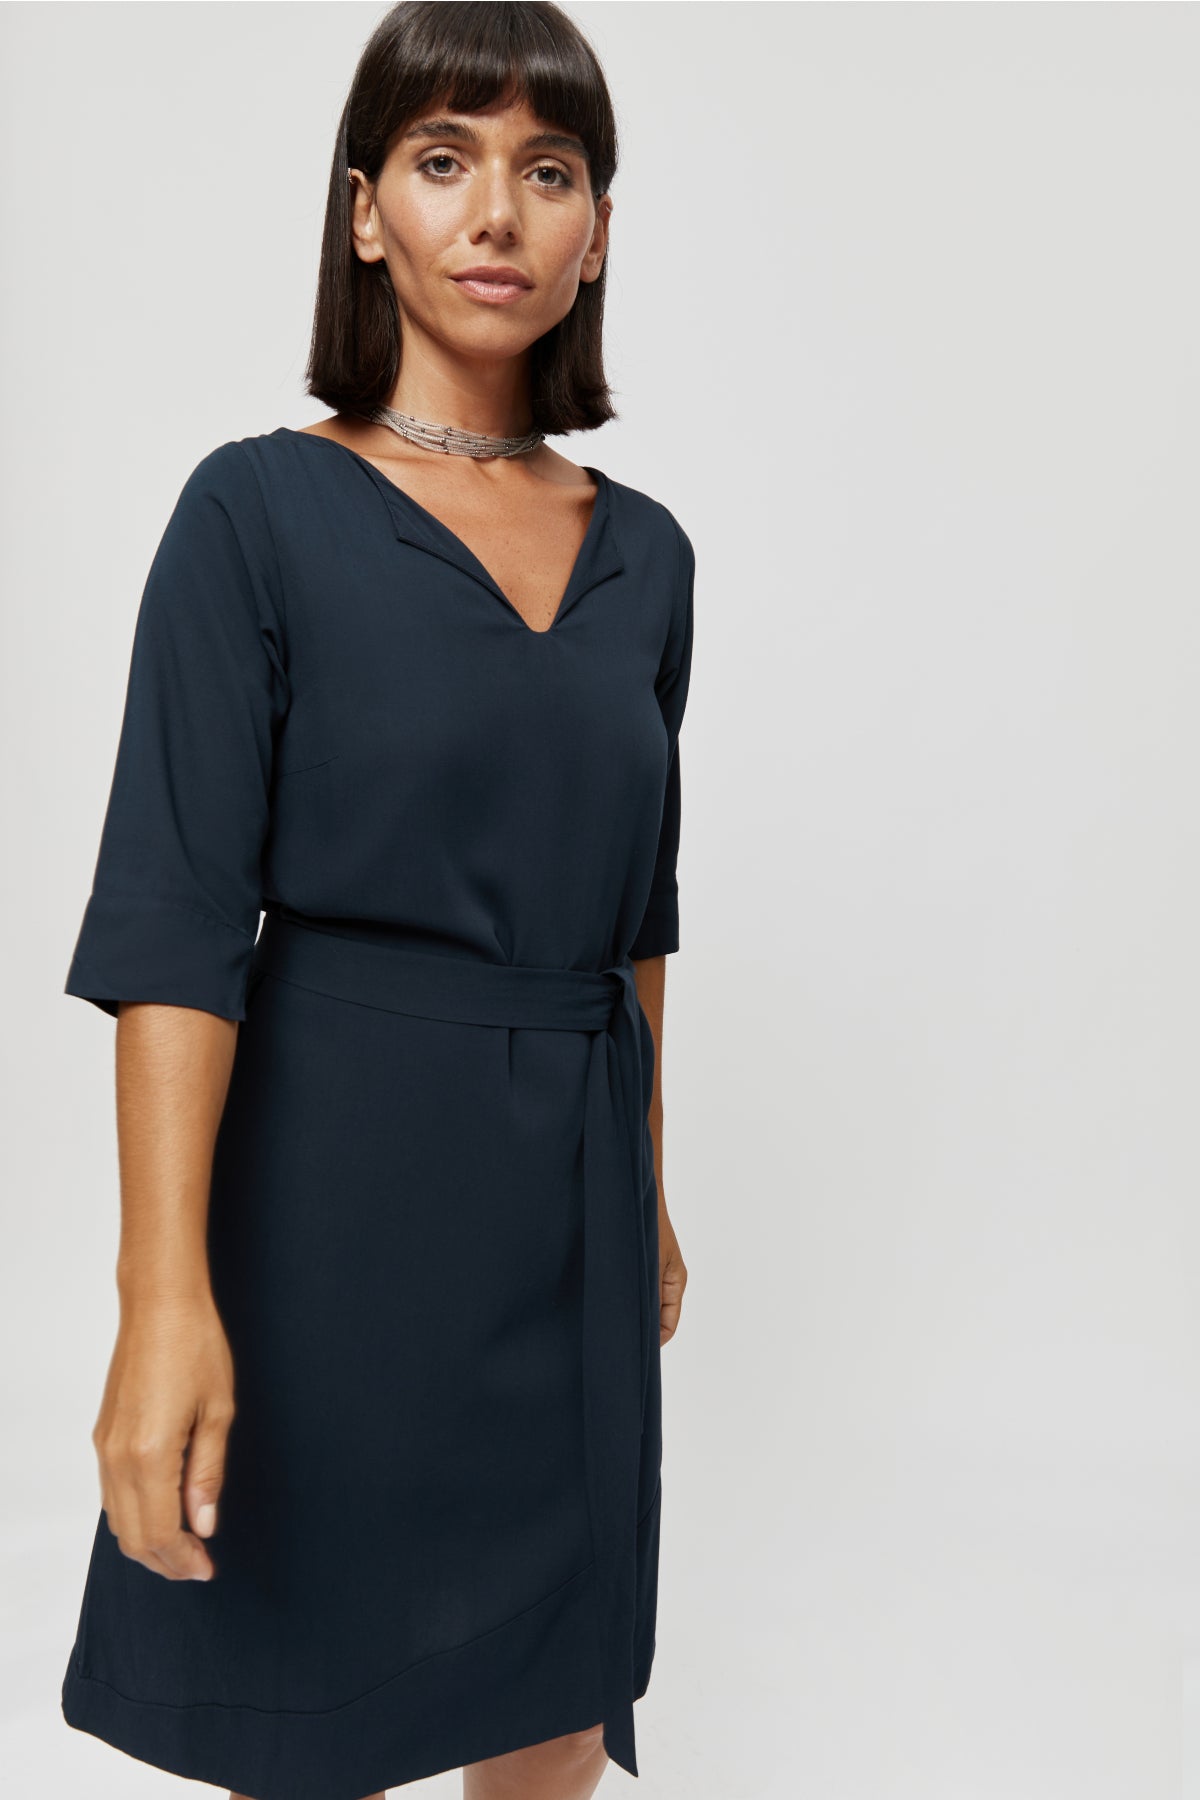 Catherine | Dress in Anthracite with optional belt